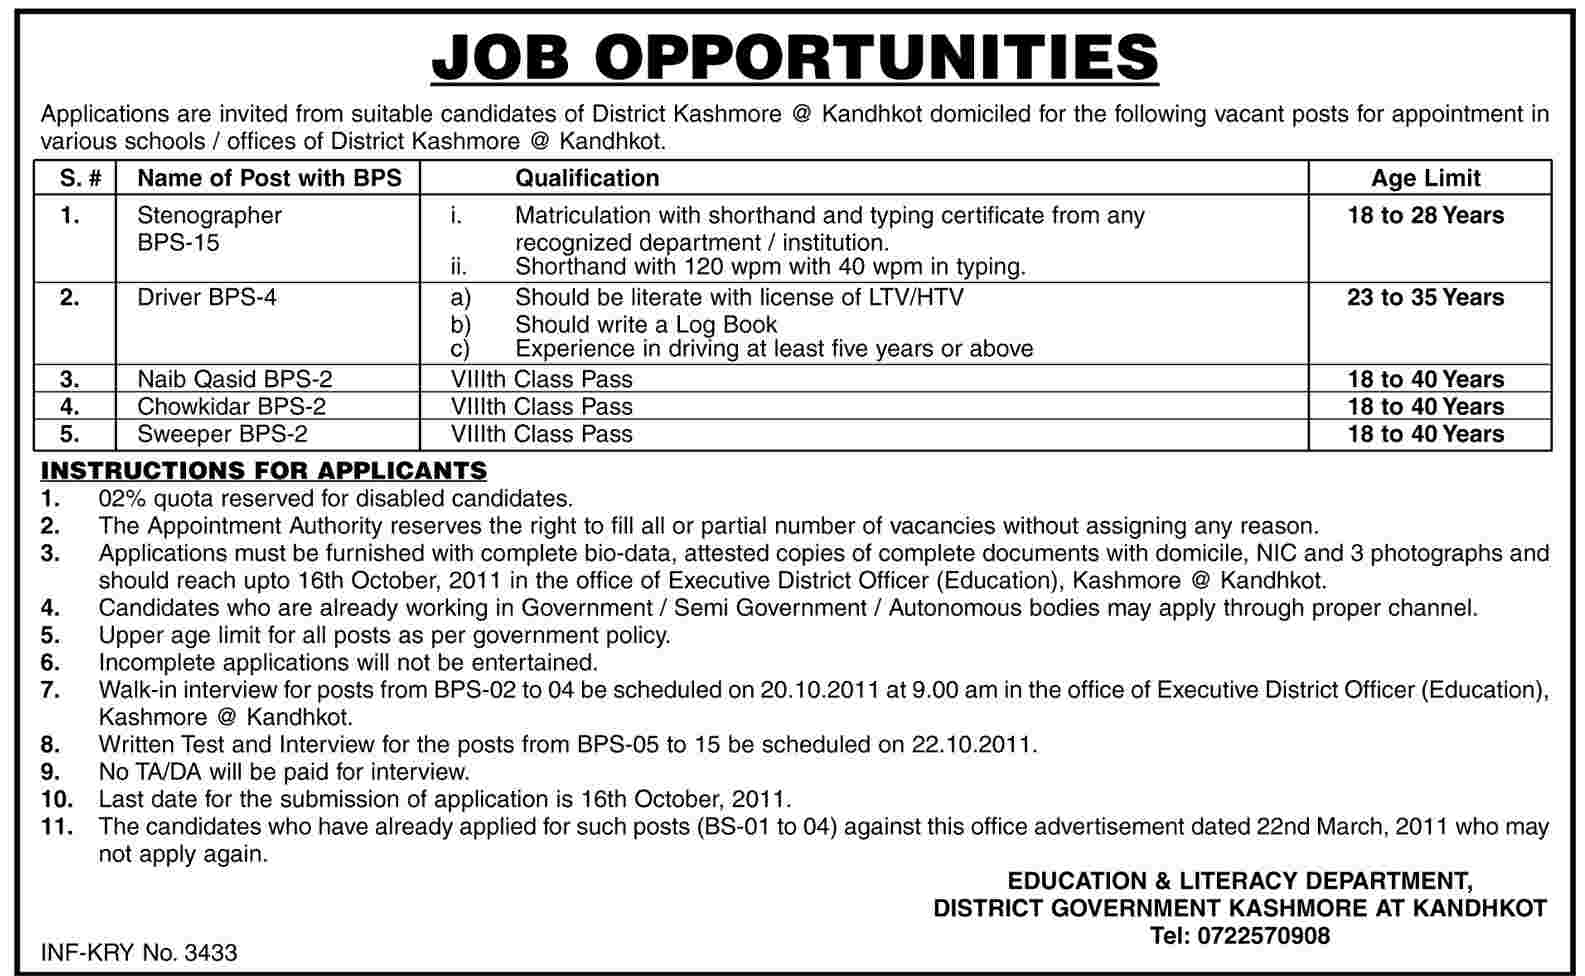 Education and Literacy Department, District Government Kashmore at Kandhkot Jobs Opportunities